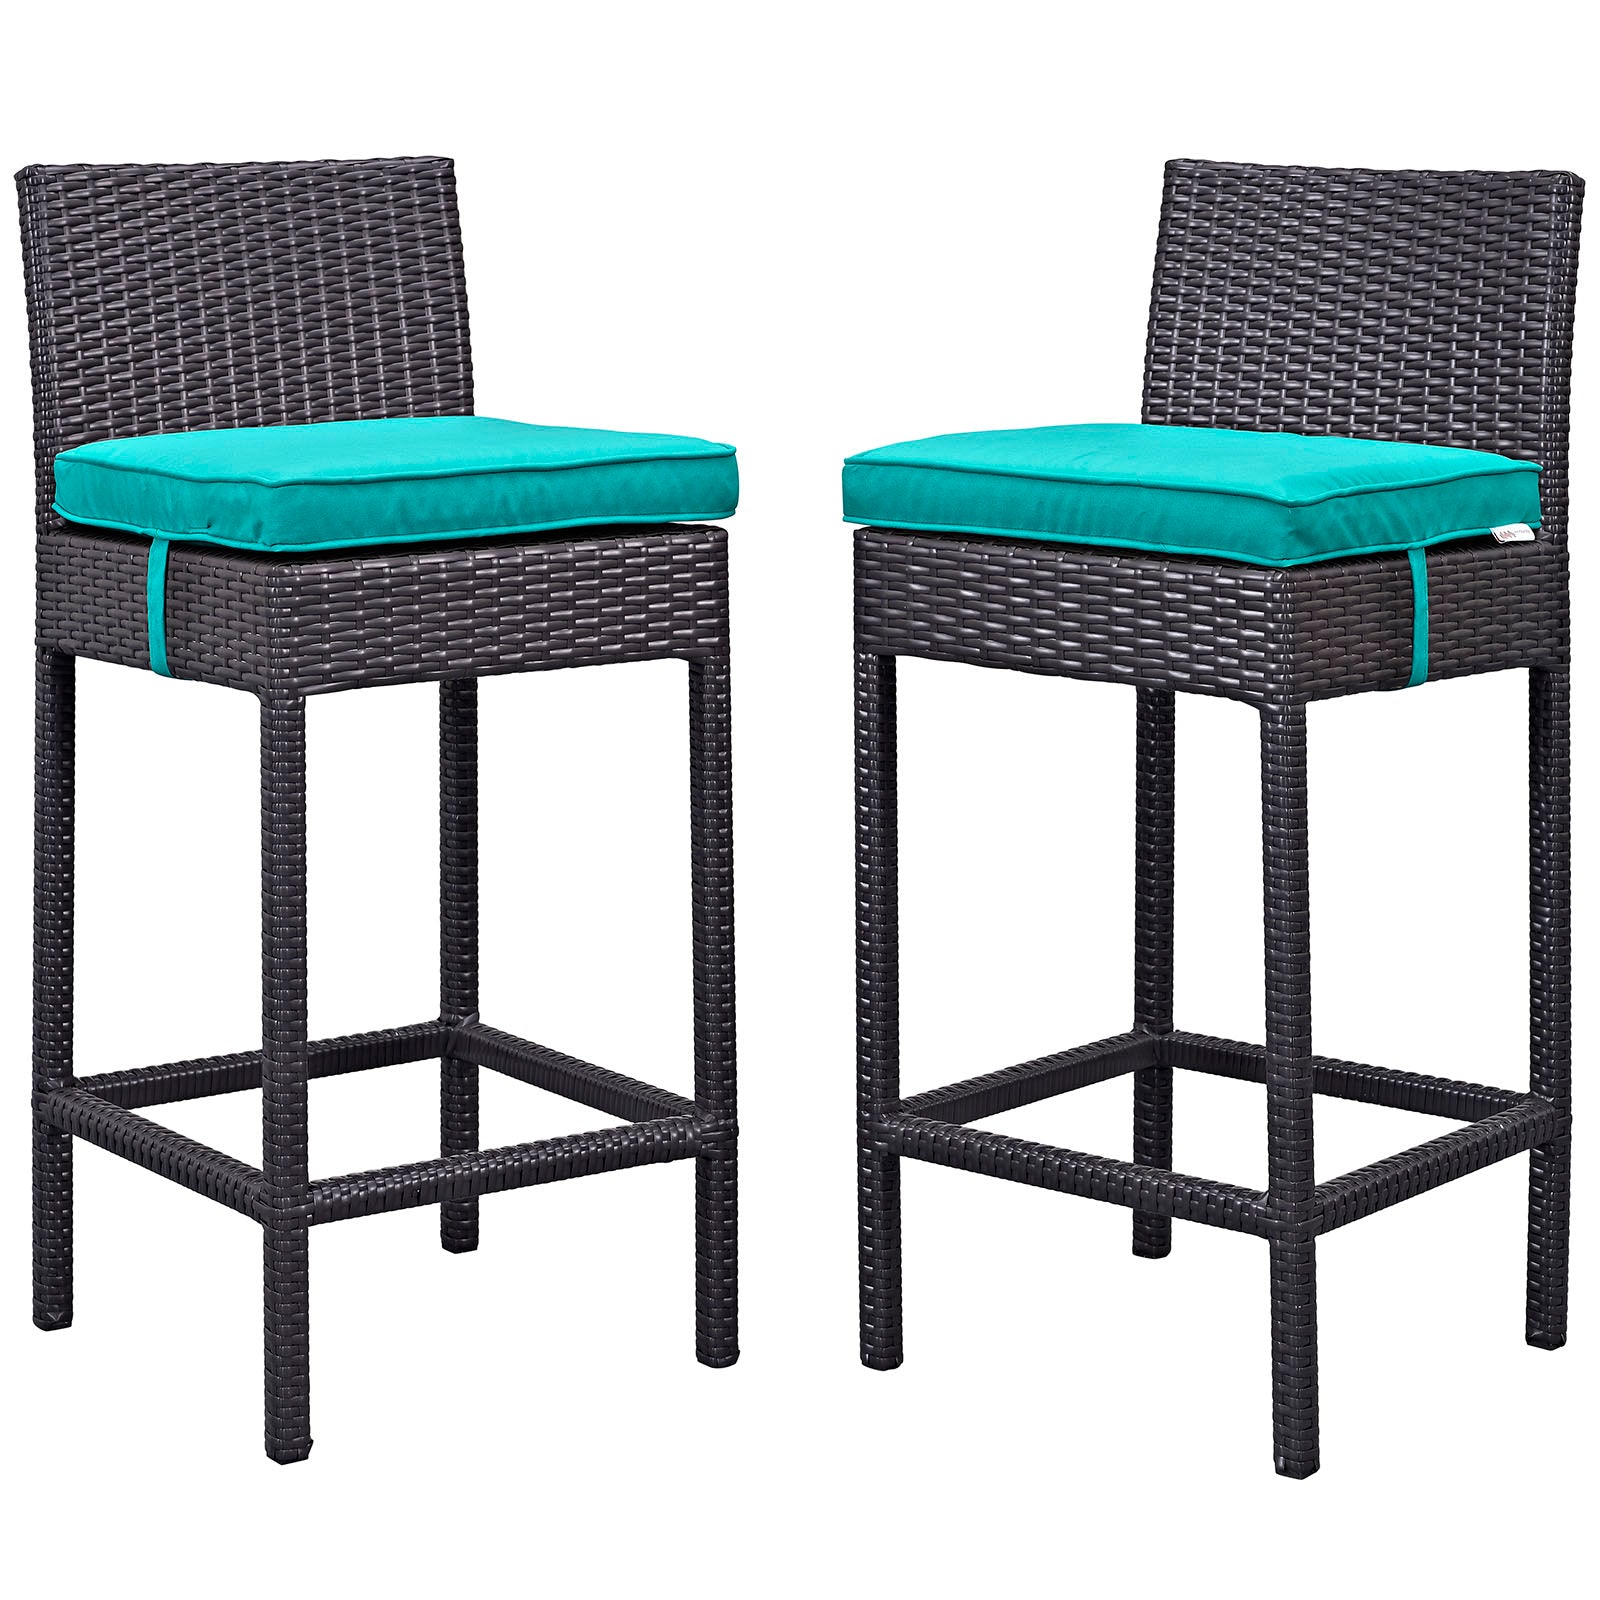 Modway Outdoor Barstools - Lift Bar Stool Outdoor Patio ( Set of 2 ) Espresso Turquoise